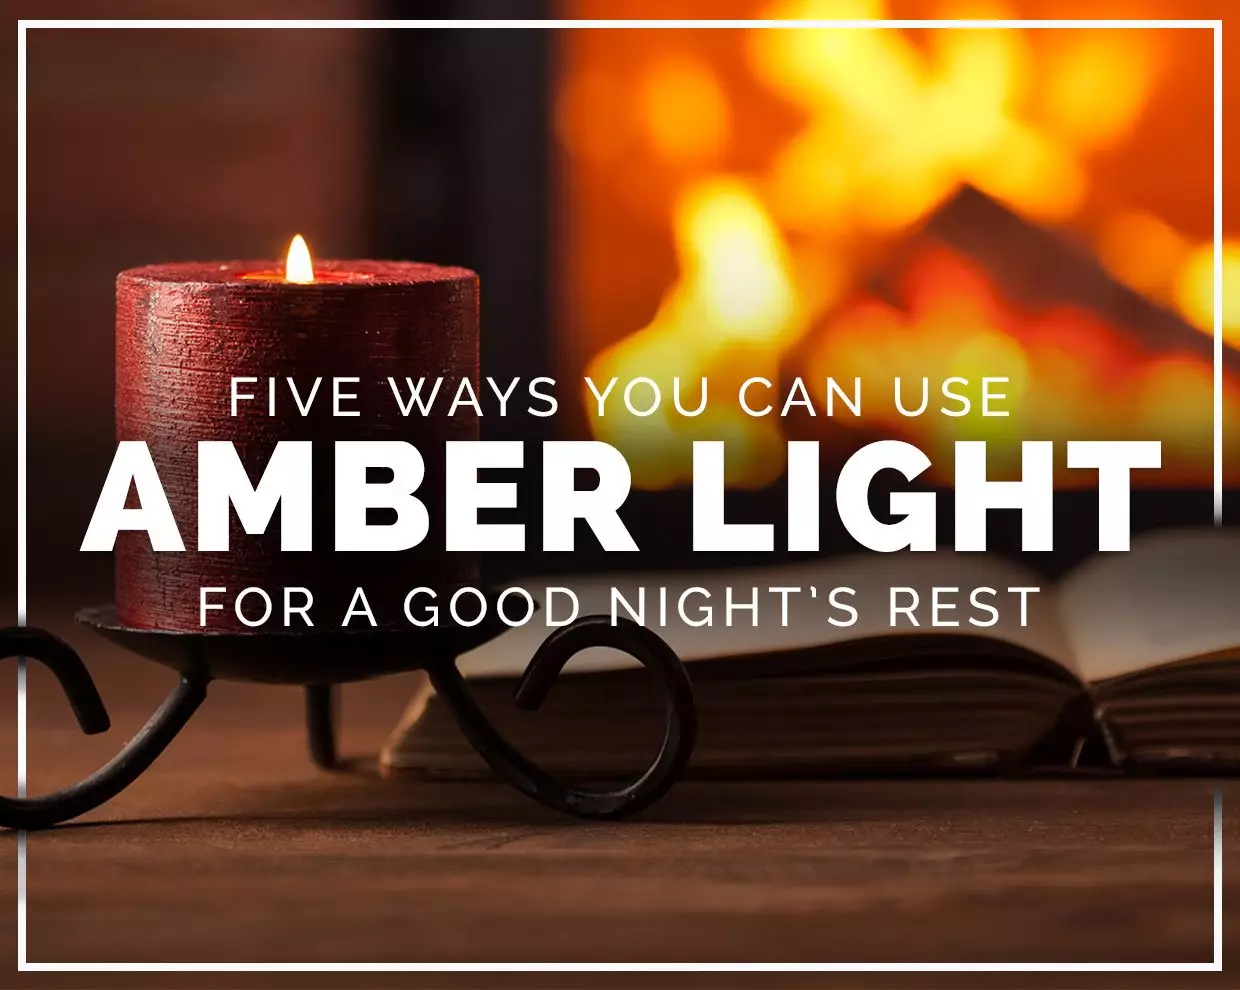 Five ways you can use amber light for a good night’s rest